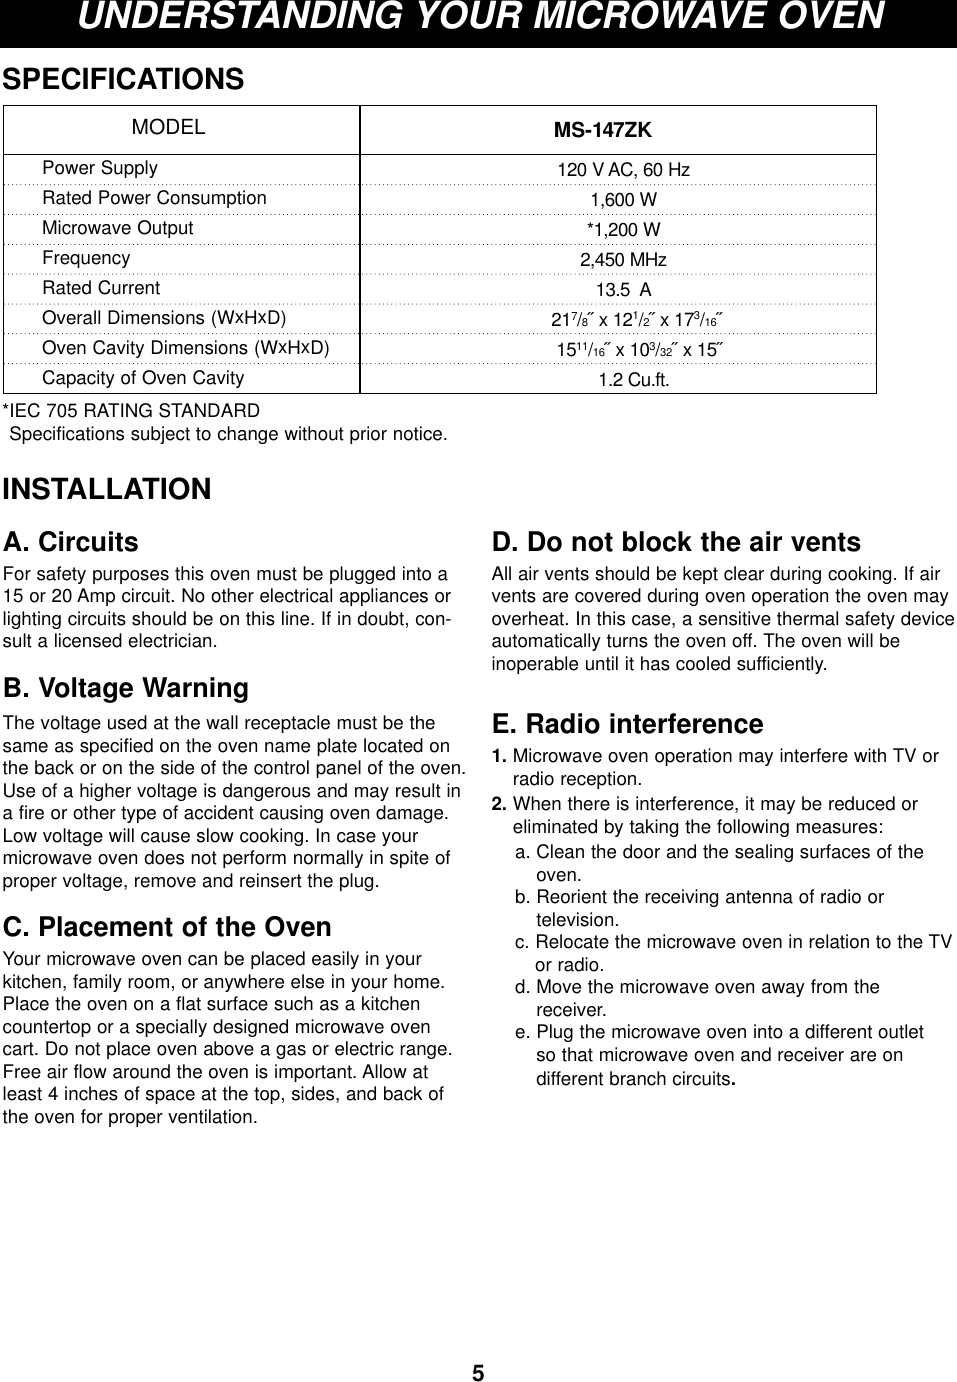 5UNDERSTANDING YOUR MICROWAVE OVENSPECIFICATIONS*IEC 705 RATING STANDARD Specifications subject to change without prior notice.MS-147ZK MODELPower SupplyRated Power ConsumptionMicrowave OutputFrequencyRated CurrentOverall Dimensions (WxHxD)Oven Cavity Dimensions (WxHxD)Capacity of Oven Cavity120 V AC, 60 Hz1,600 W*1,200 W2,450 MHz13.5  A217/8˝ x 121/2˝ x 173/16˝1511/16˝ x 103/32˝ x 15˝1.2 Cu.ft.INSTALLATIONA. CircuitsFor safety purposes this oven must be plugged into a15 or 20 Amp circuit. No other electrical appliances orlighting circuits should be on this line. If in doubt, con-sult a licensed electrician.B. Voltage Warning The voltage used at the wall receptacle must be thesame as specified on the oven name plate located onthe back or on the side of the control panel of the oven.Use of a higher voltage is dangerous and may result ina fire or other type of accident causing oven damage.Low voltage will cause slow cooking. In case yourmicrowave oven does not perform normally in spite ofproper voltage, remove and reinsert the plug.C. Placement of the OvenYour microwave oven can be placed easily in yourkitchen, family room, or anywhere else in your home.Place the oven on a flat surface such as a kitchencountertop or a specially designed microwave ovencart. Do not place oven above a gas or electric range.Free air flow around the oven is important. Allow atleast 4 inches of space at the top, sides, and back ofthe oven for proper ventilation. D. Do not block the air ventsAll air vents should be kept clear during cooking. If airvents are covered during oven operation the oven mayoverheat. In this case, a sensitive thermal safety deviceautomatically turns the oven off. The oven will be inoperable until it has cooled sufficiently.E. Radio interference1. Microwave oven operation may interfere with TV orradio reception.2. When there is interference, it may be reduced oreliminated by taking the following measures:a. Clean the door and the sealing surfaces of theoven.b. Reorient the receiving antenna of radio or television.c. Relocate the microwave oven in relation to the TVor radio.d. Move the microwave oven away from the receiver.e. Plug the microwave oven into a different outlet so that microwave oven and receiver are on different branch circuits.